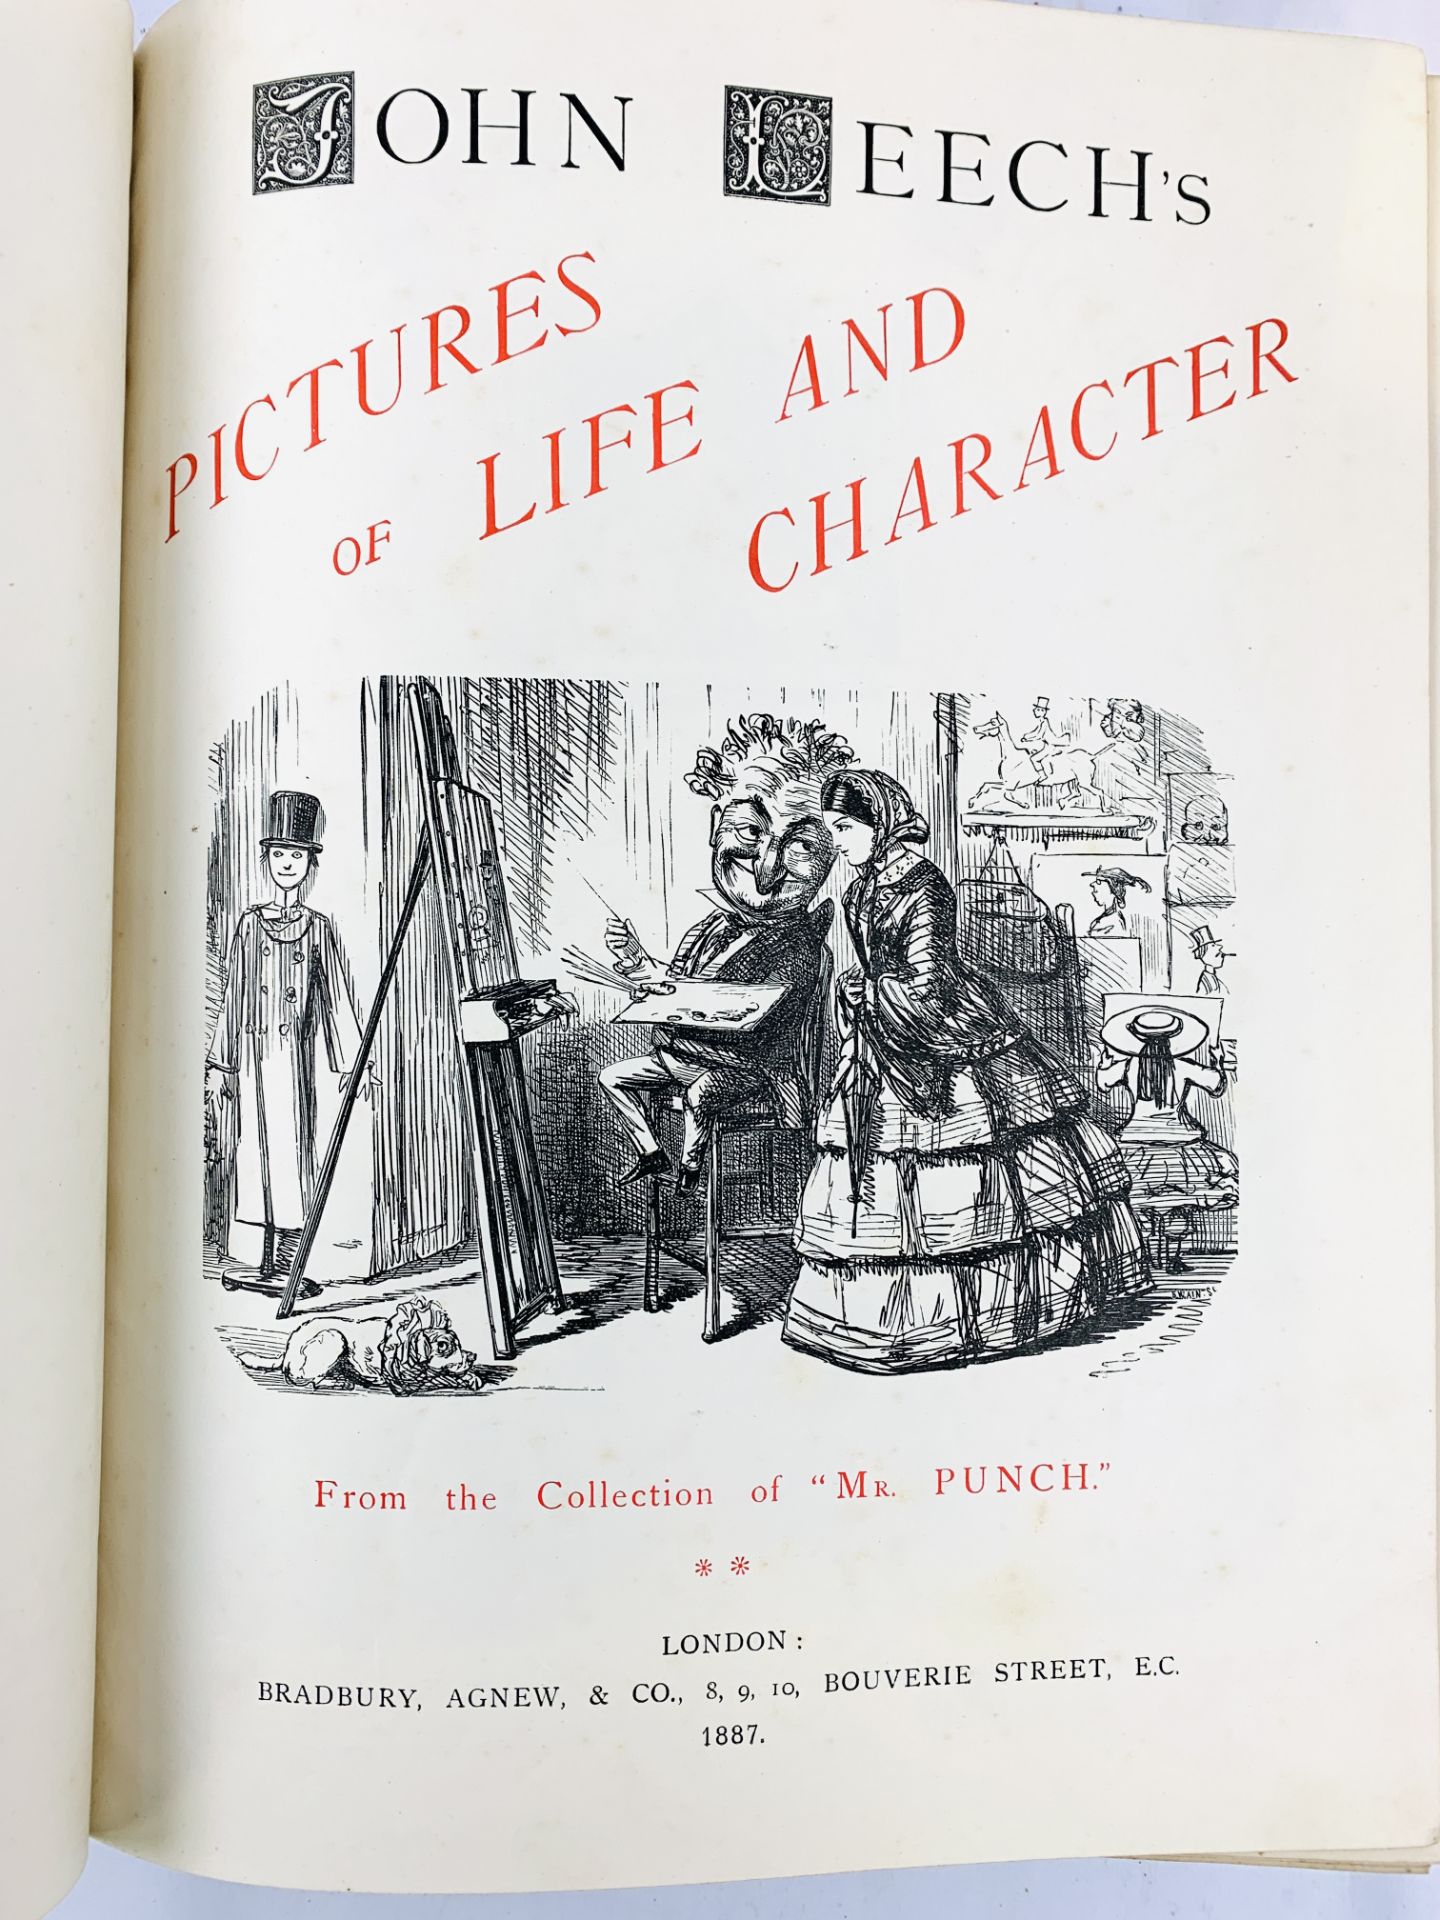 Pictures of Life and Character, 1886-1887, John Leech. - Image 3 of 3